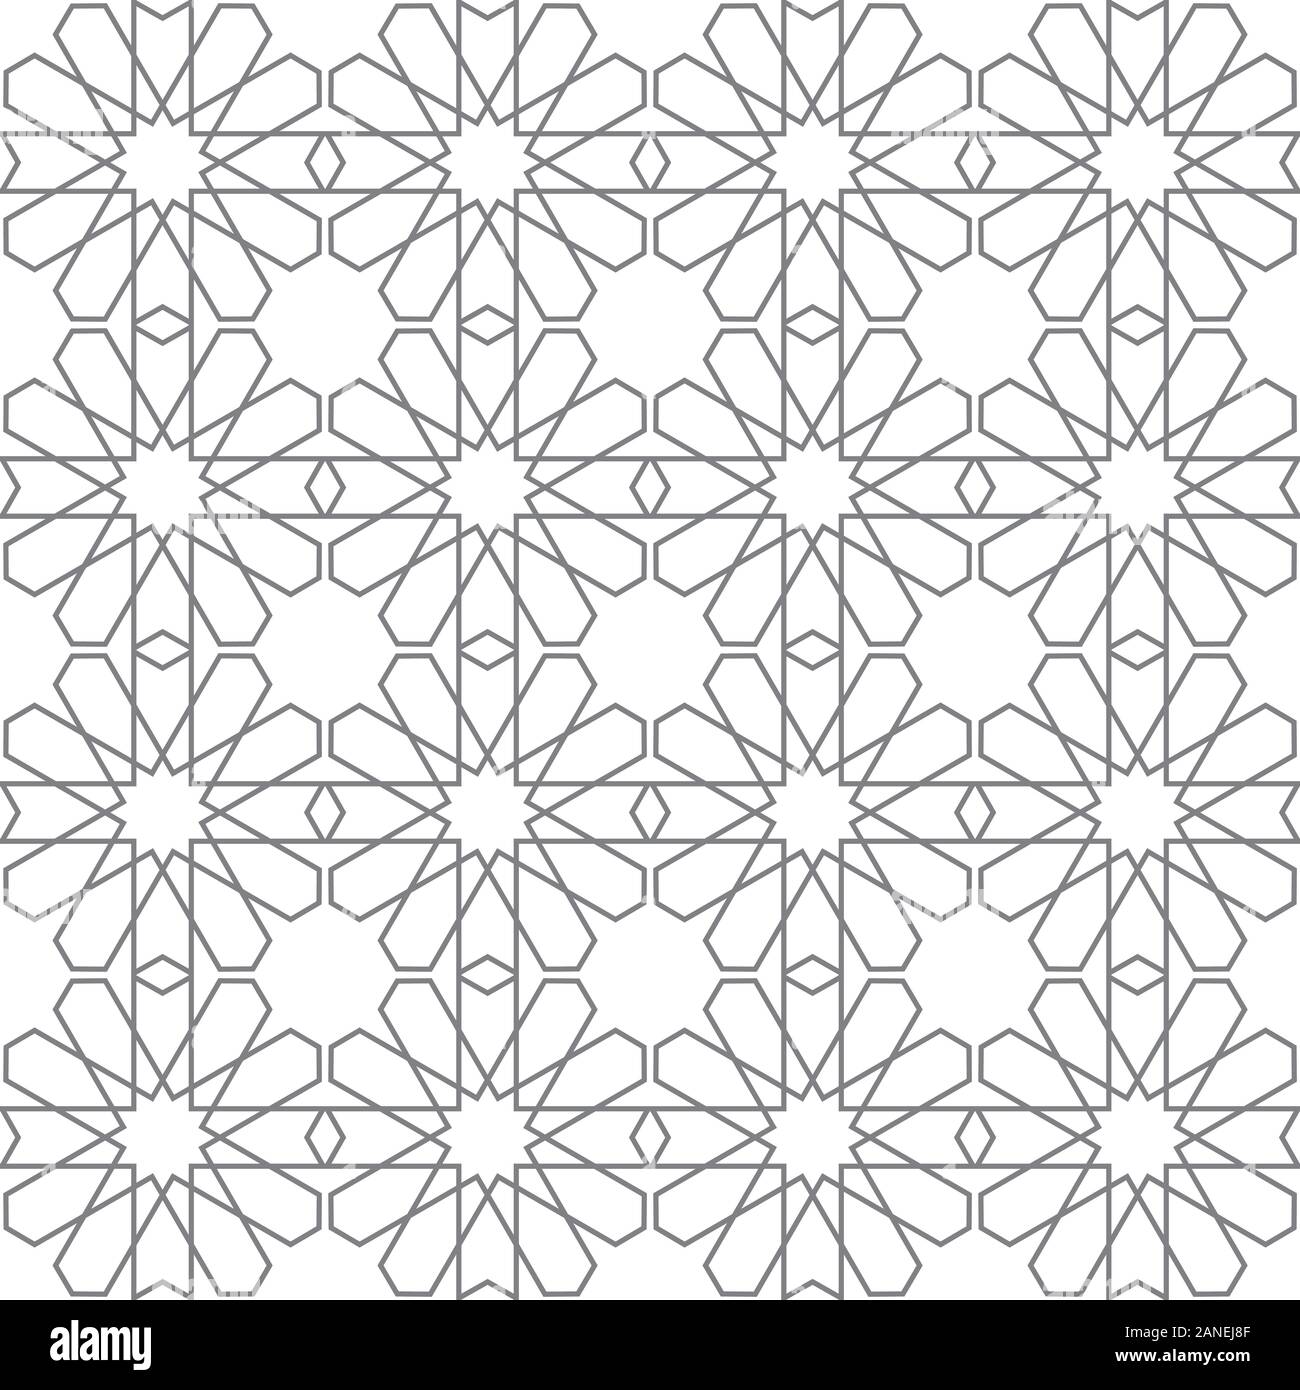 islamic patterns black and white